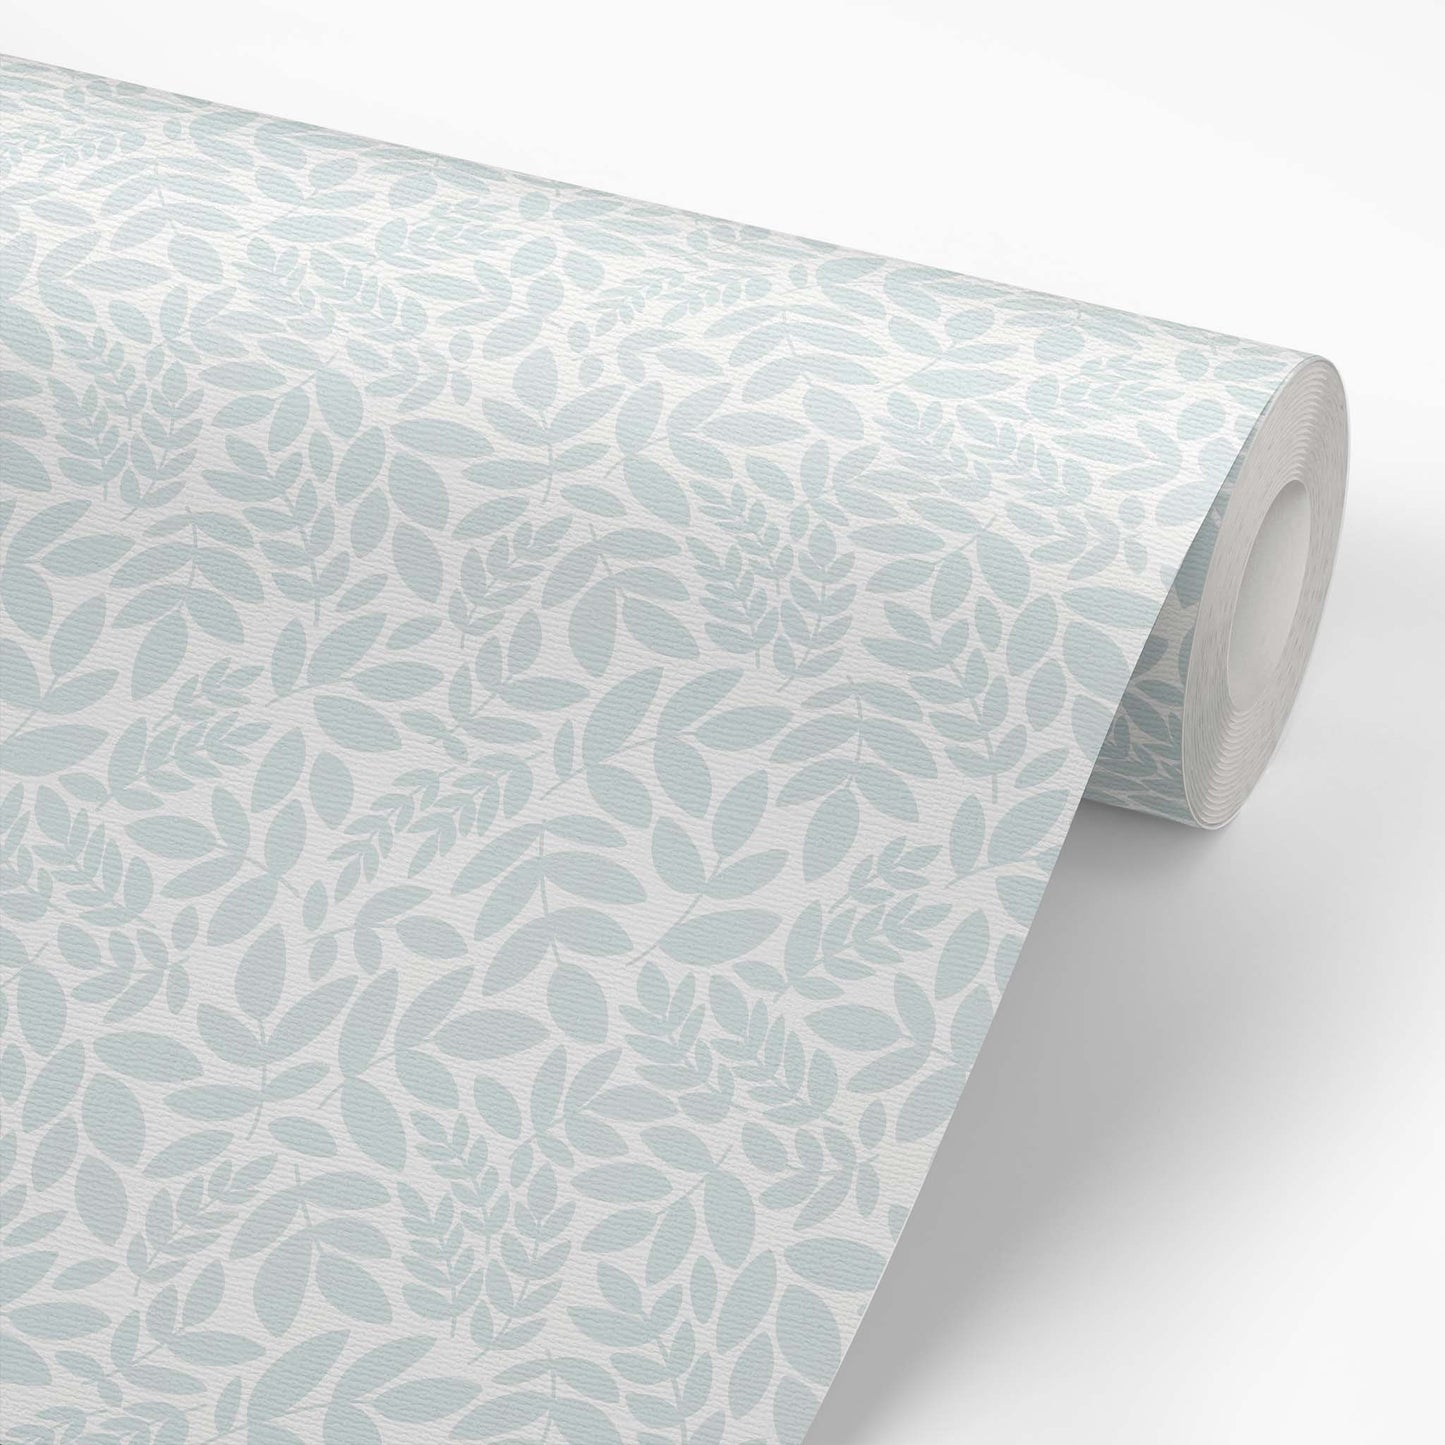 Adorn your walls with our luxurious Falling Leaves Wallpaper in Cloudy Sky Blue. The scattered flowers add a subtle touch of elegance, while the soft blue hue brings a calming and sophisticated atmosphere to any room shown on a wallpaper roll.